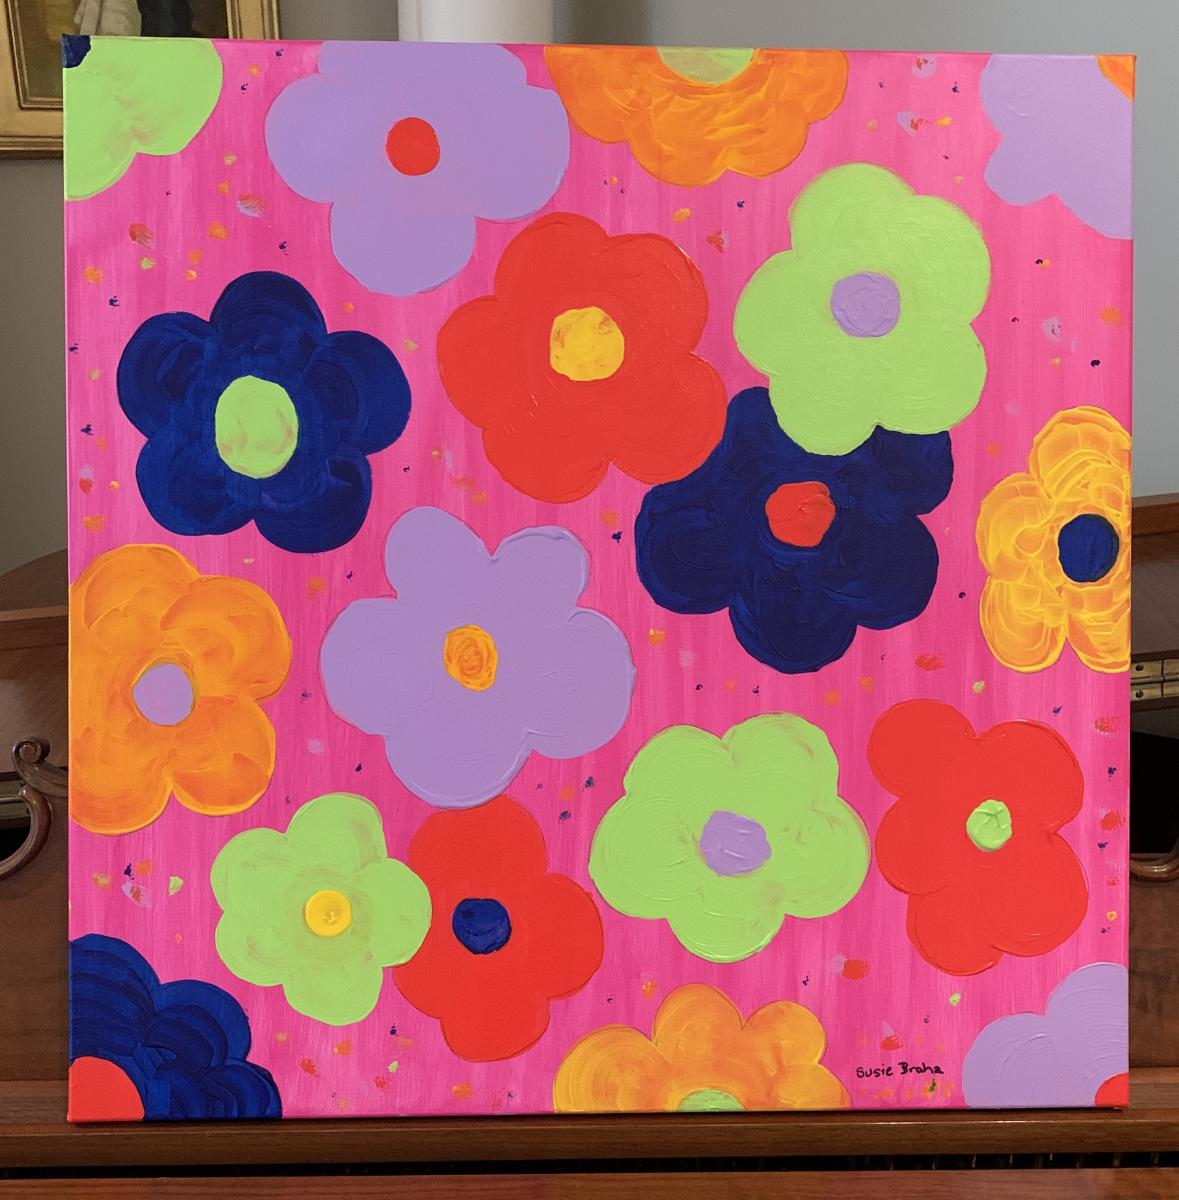 "Psychedelic Daisies" Acrylic on Canvas  (For Sale $565.) : Abstracts : Susan Braha Photography and Fine Art